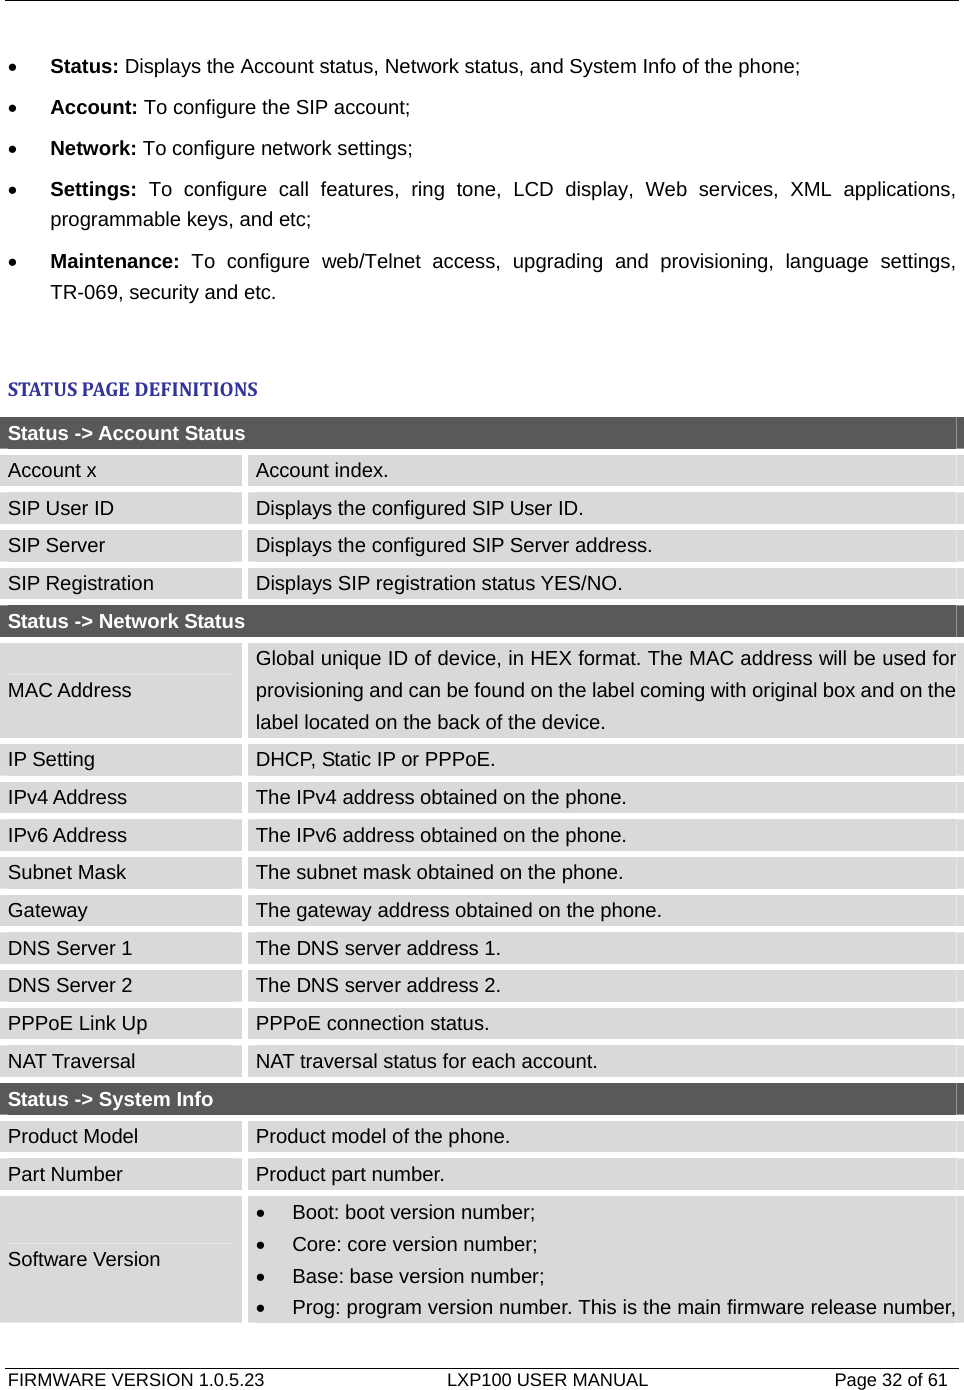   FIRMWARE VERSION 1.0.5.23                    LXP100 USER MANUAL                  Page 32 of 61                                   • Status: Displays the Account status, Network status, and System Info of the phone; • Account: To configure the SIP account; • Network: To configure network settings; • Settings: To configure call features, ring tone, LCD display, Web services, XML applications, programmable keys, and etc; • Maintenance:  To configure web/Telnet access, upgrading and provisioning, language settings, TR-069, security and etc.  STATUSPAGEDEFINITIONSStatus -&gt; Account Status Account x  Account index. SIP User ID  Displays the configured SIP User ID. SIP Server  Displays the configured SIP Server address. SIP Registration  Displays SIP registration status YES/NO. Status -&gt; Network Status MAC Address Global unique ID of device, in HEX format. The MAC address will be used for provisioning and can be found on the label coming with original box and on the label located on the back of the device. IP Setting  DHCP, Static IP or PPPoE. IPv4 Address  The IPv4 address obtained on the phone. IPv6 Address  The IPv6 address obtained on the phone. Subnet Mask  The subnet mask obtained on the phone. Gateway  The gateway address obtained on the phone. DNS Server 1  The DNS server address 1. DNS Server 2  The DNS server address 2. PPPoE Link Up  PPPoE connection status. NAT Traversal  NAT traversal status for each account. Status -&gt; System Info Product Model  Product model of the phone. Part Number  Product part number. Software Version •  Boot: boot version number; •  Core: core version number; •  Base: base version number; •  Prog: program version number. This is the main firmware release number, 